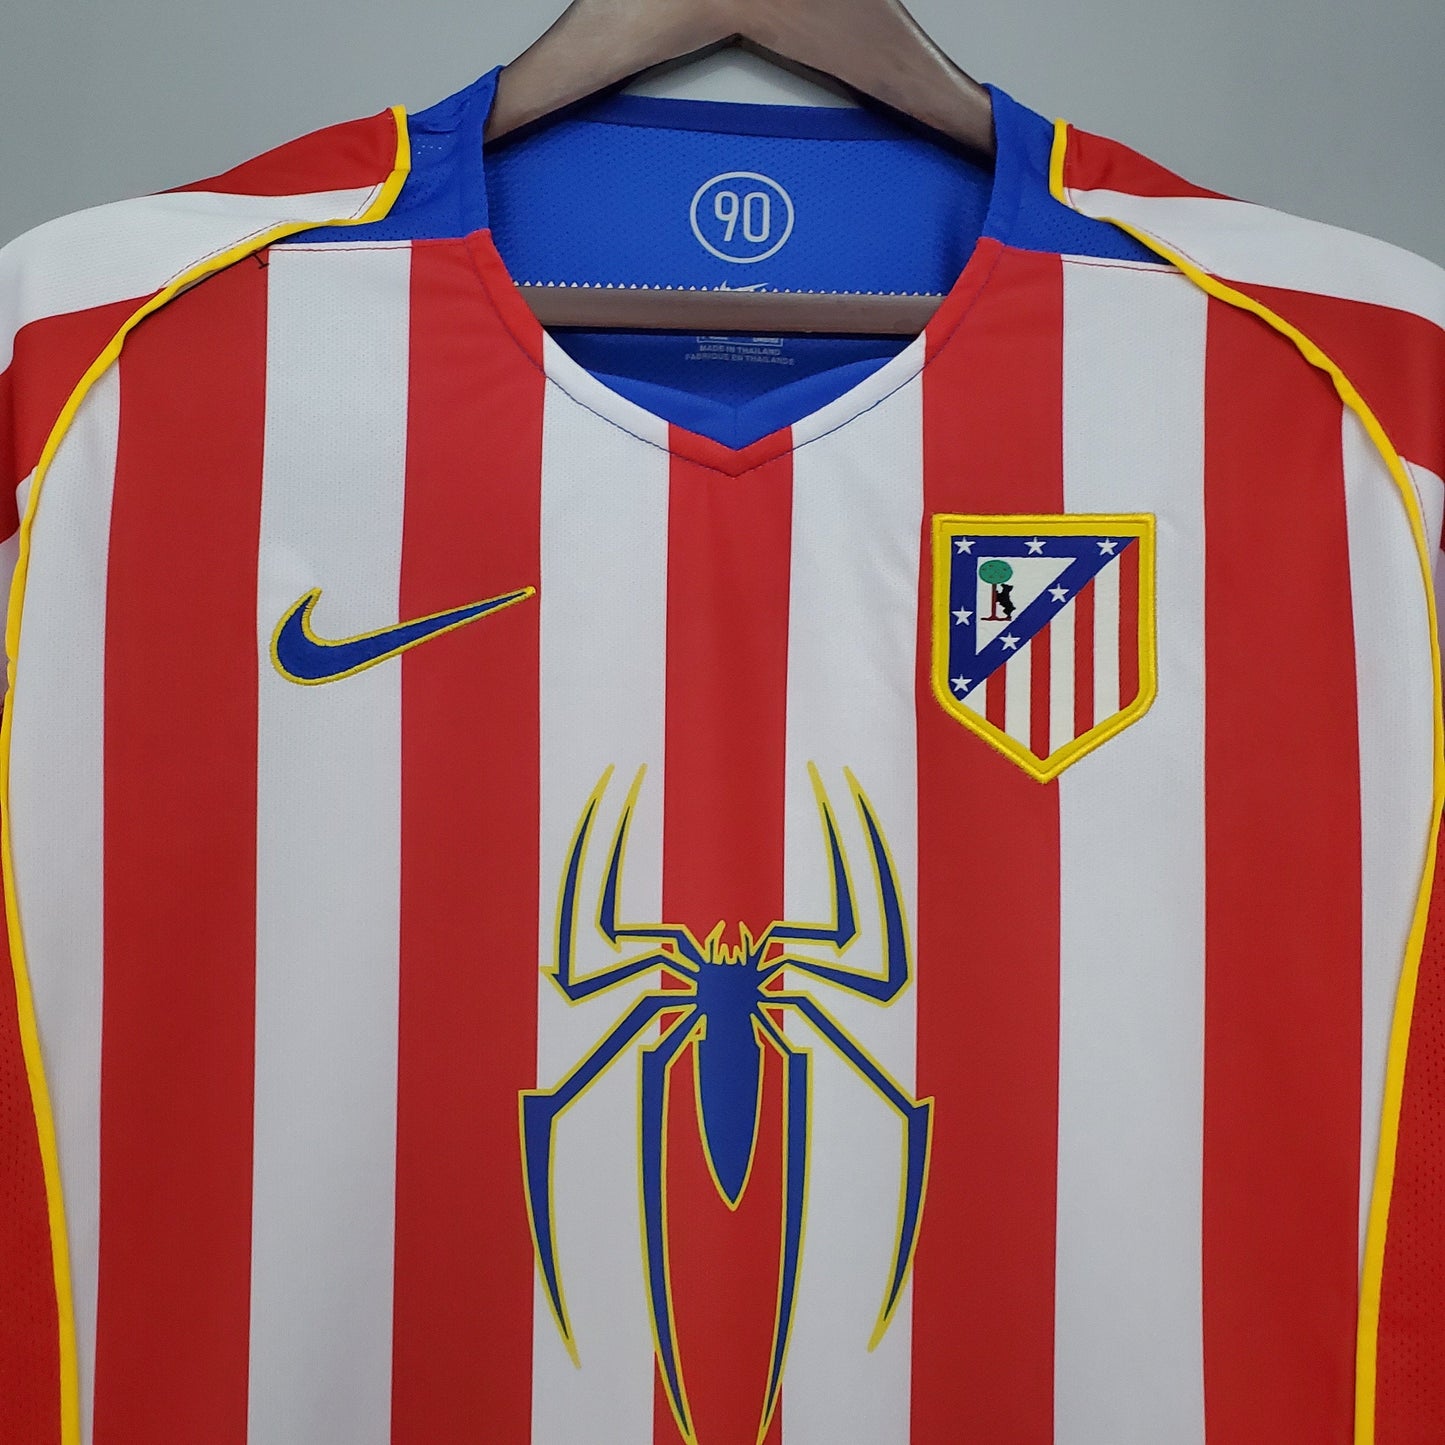 ATLETICO MADRID 2004/05 Spider-Man Football Home Shirt (Jersey)